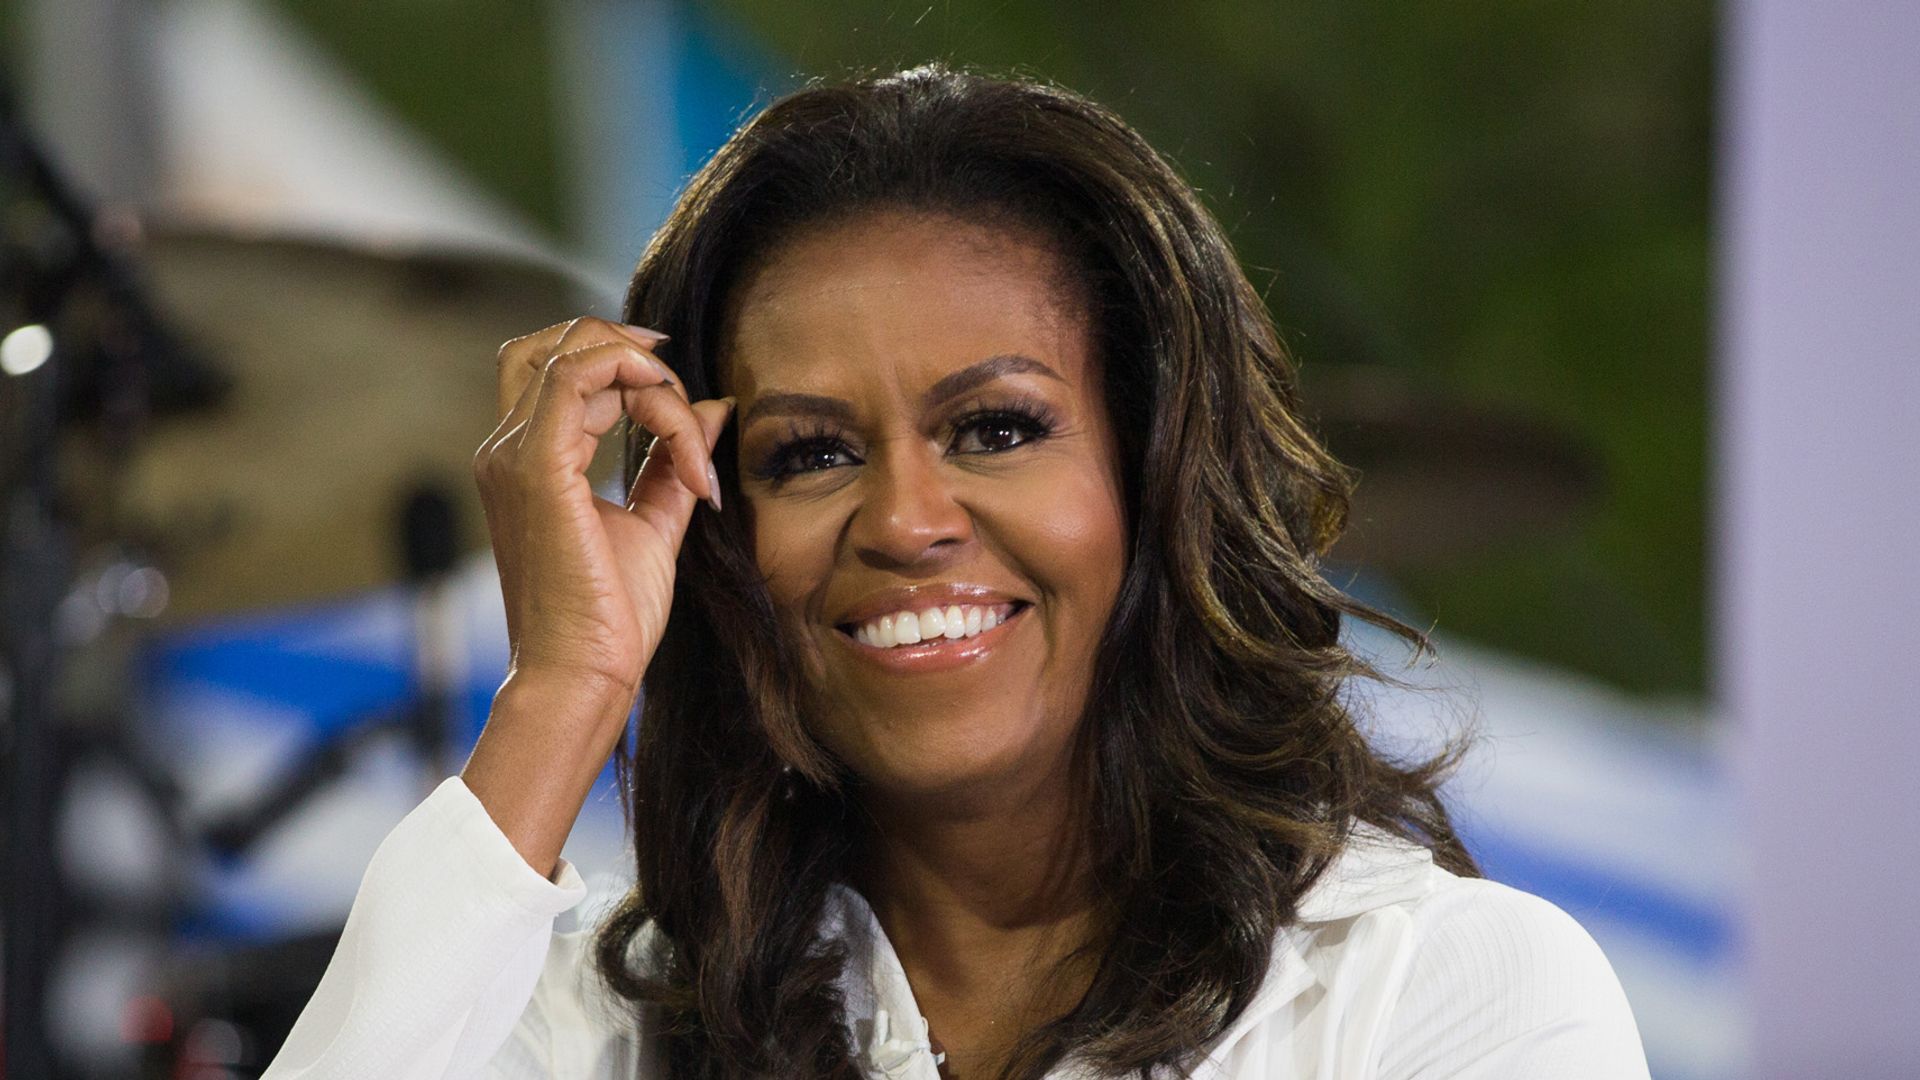 Michelle Obama smiles while wearing a white suit